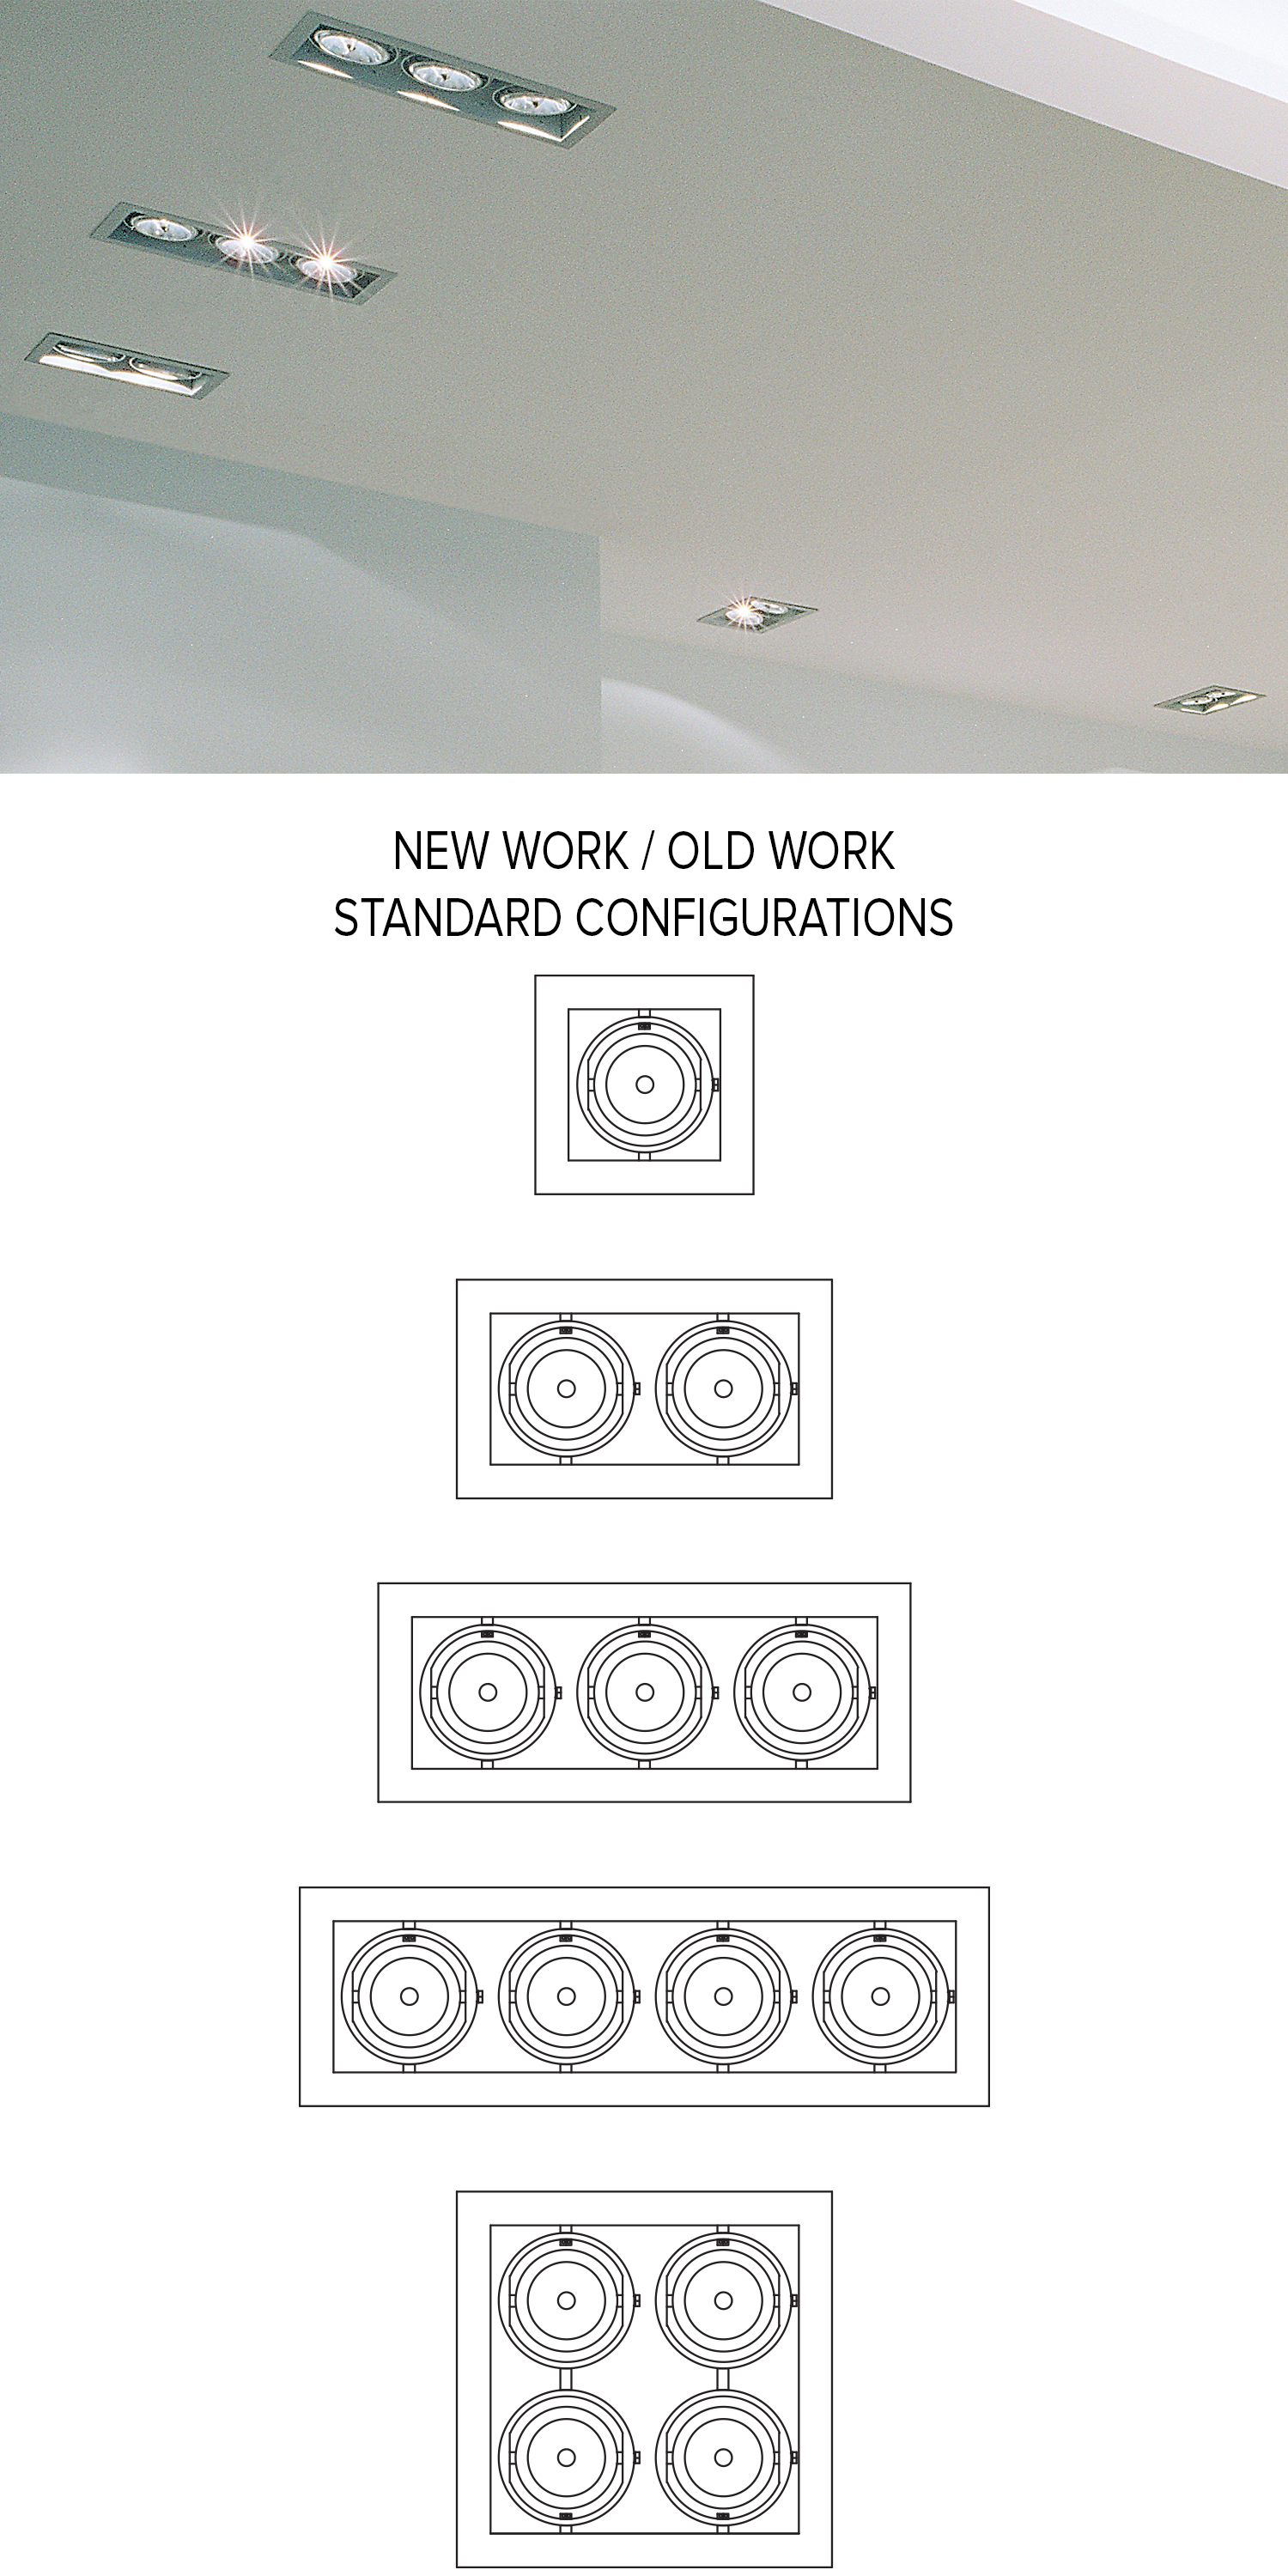 Trimmed standard configurations